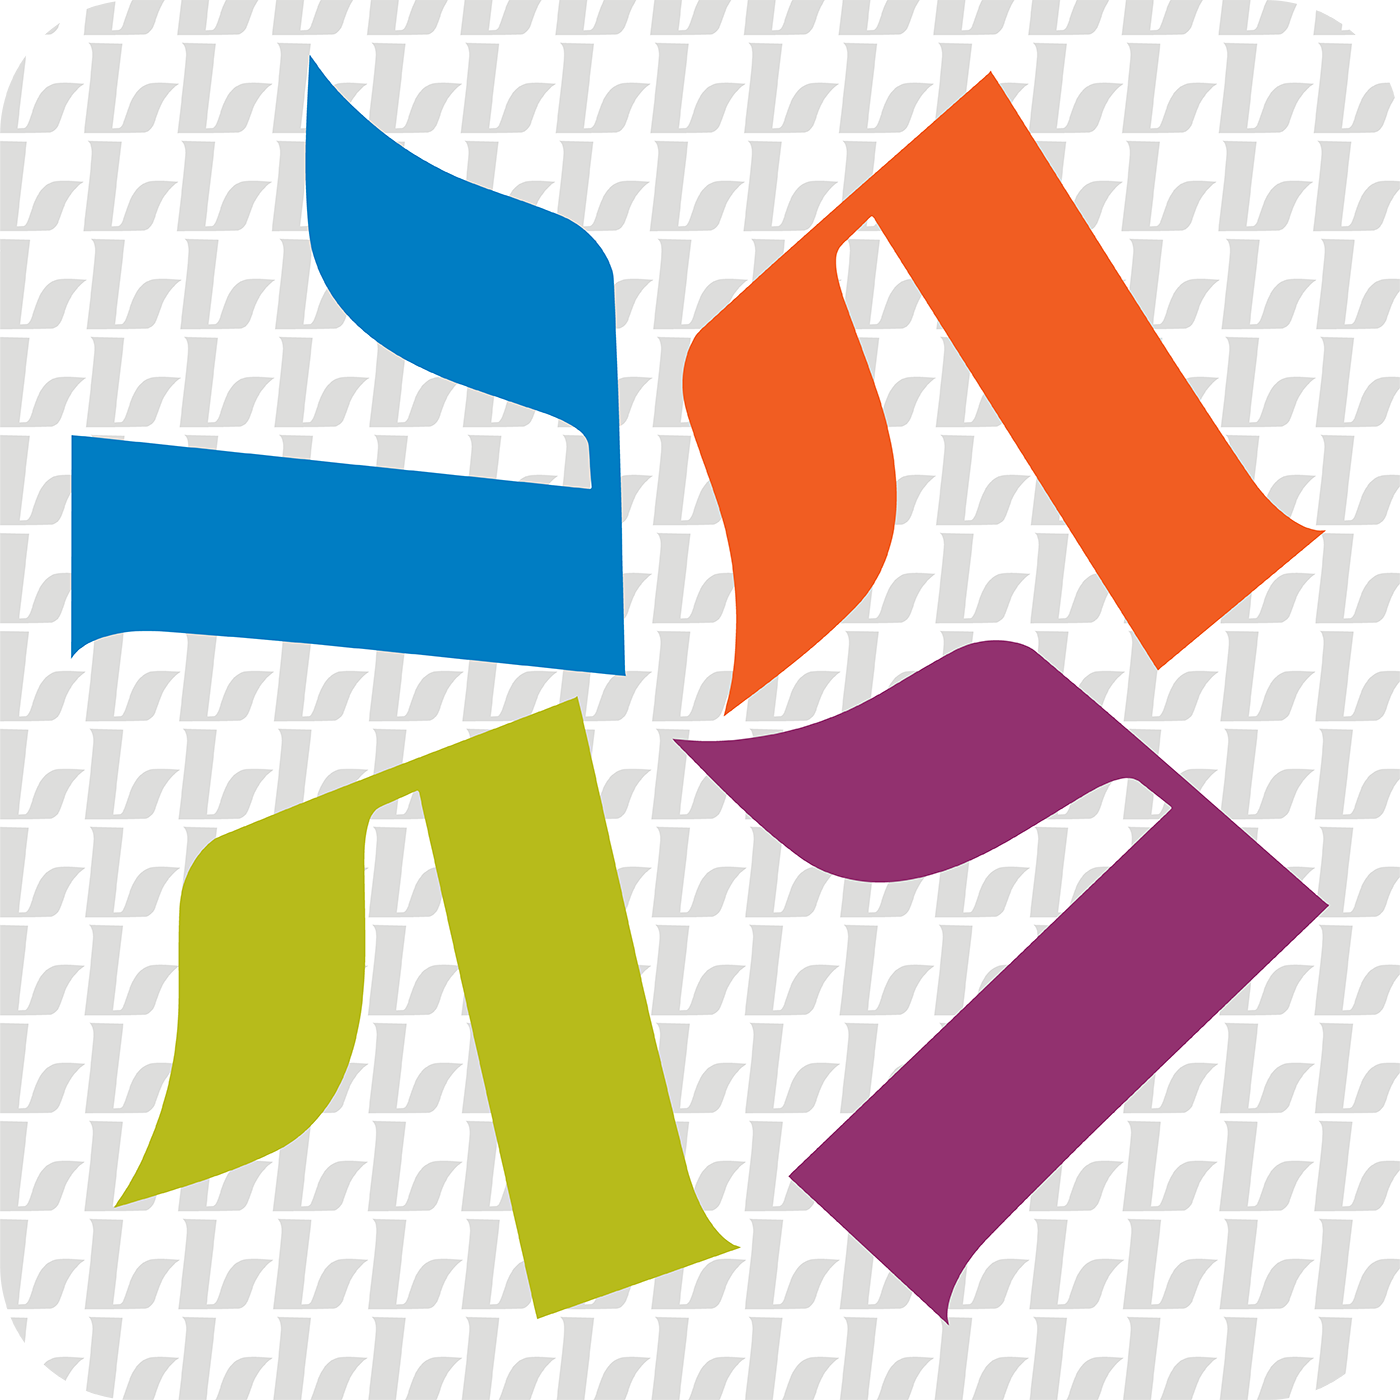 Episode 5: What is a B'nai Mitzvah?